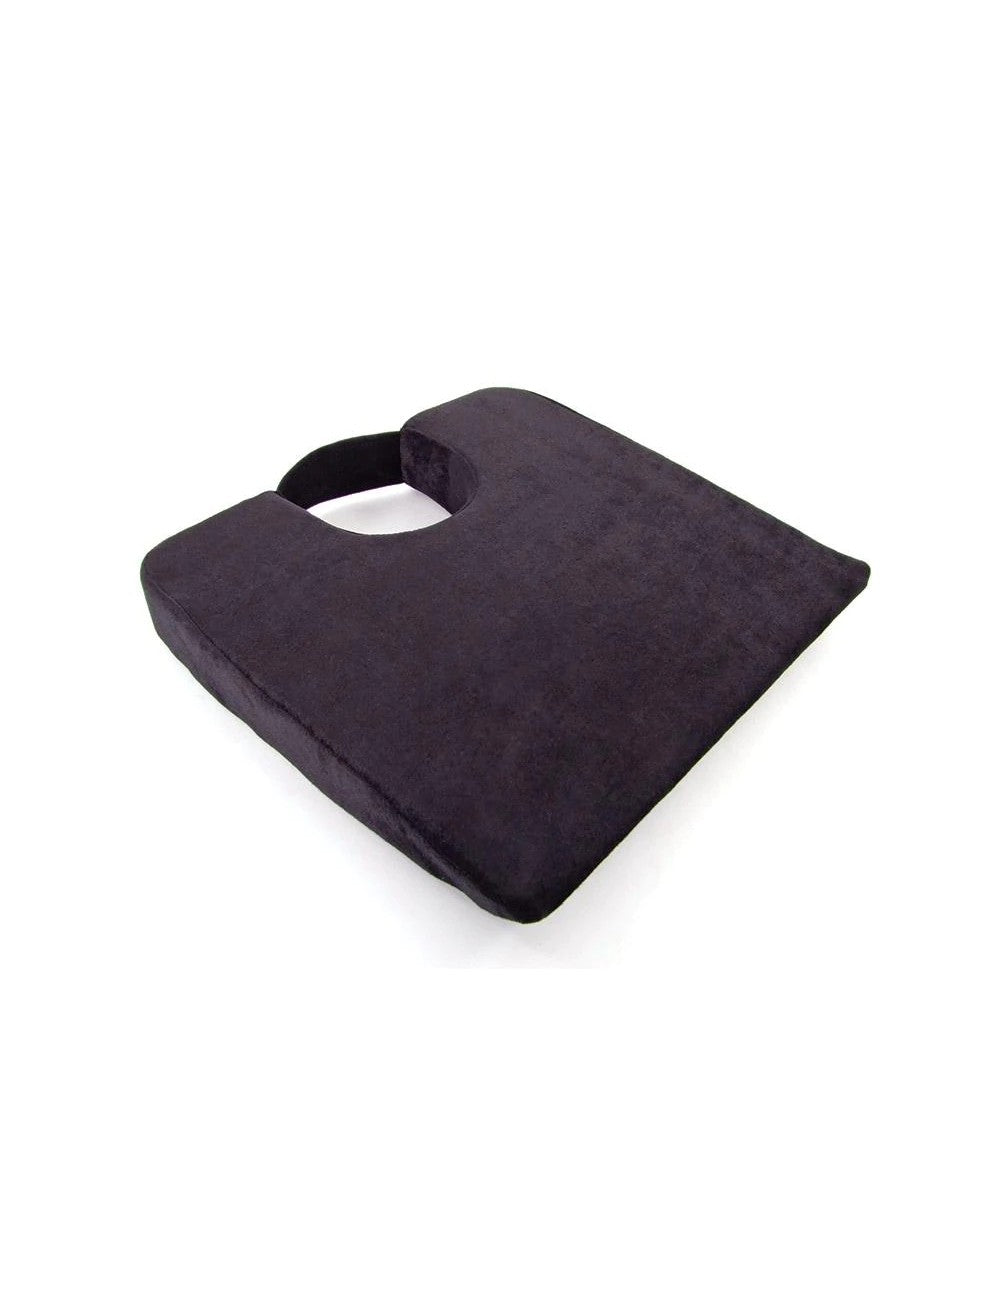 66fit allcare coccyx cushion